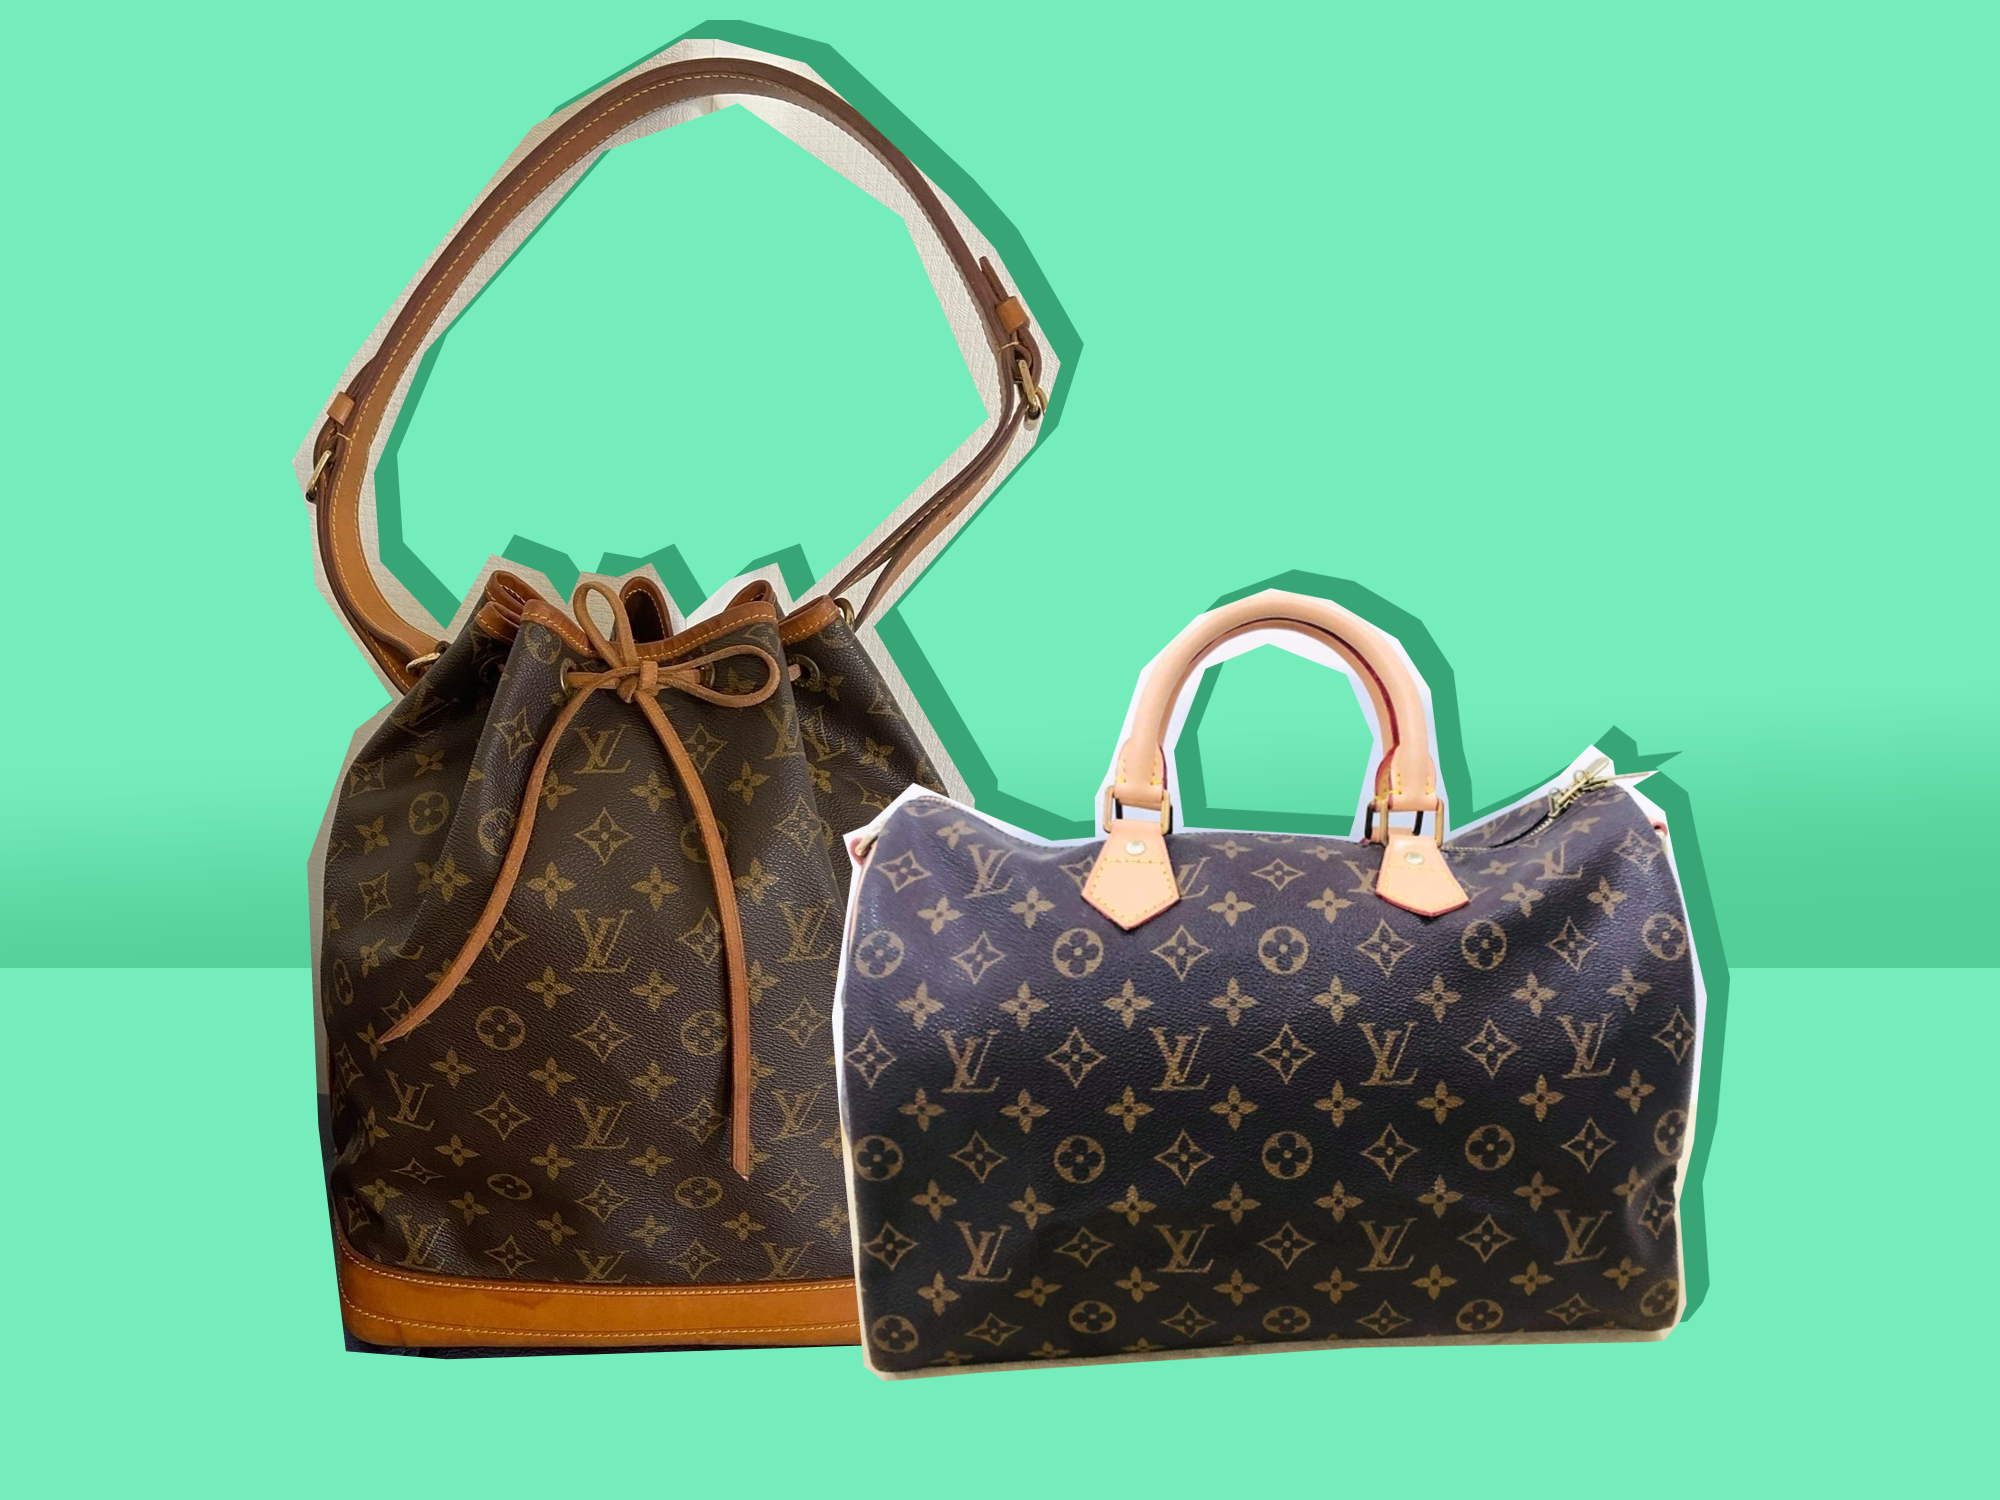 The Louis Vuitton Keepall Bag Has Endless Potential